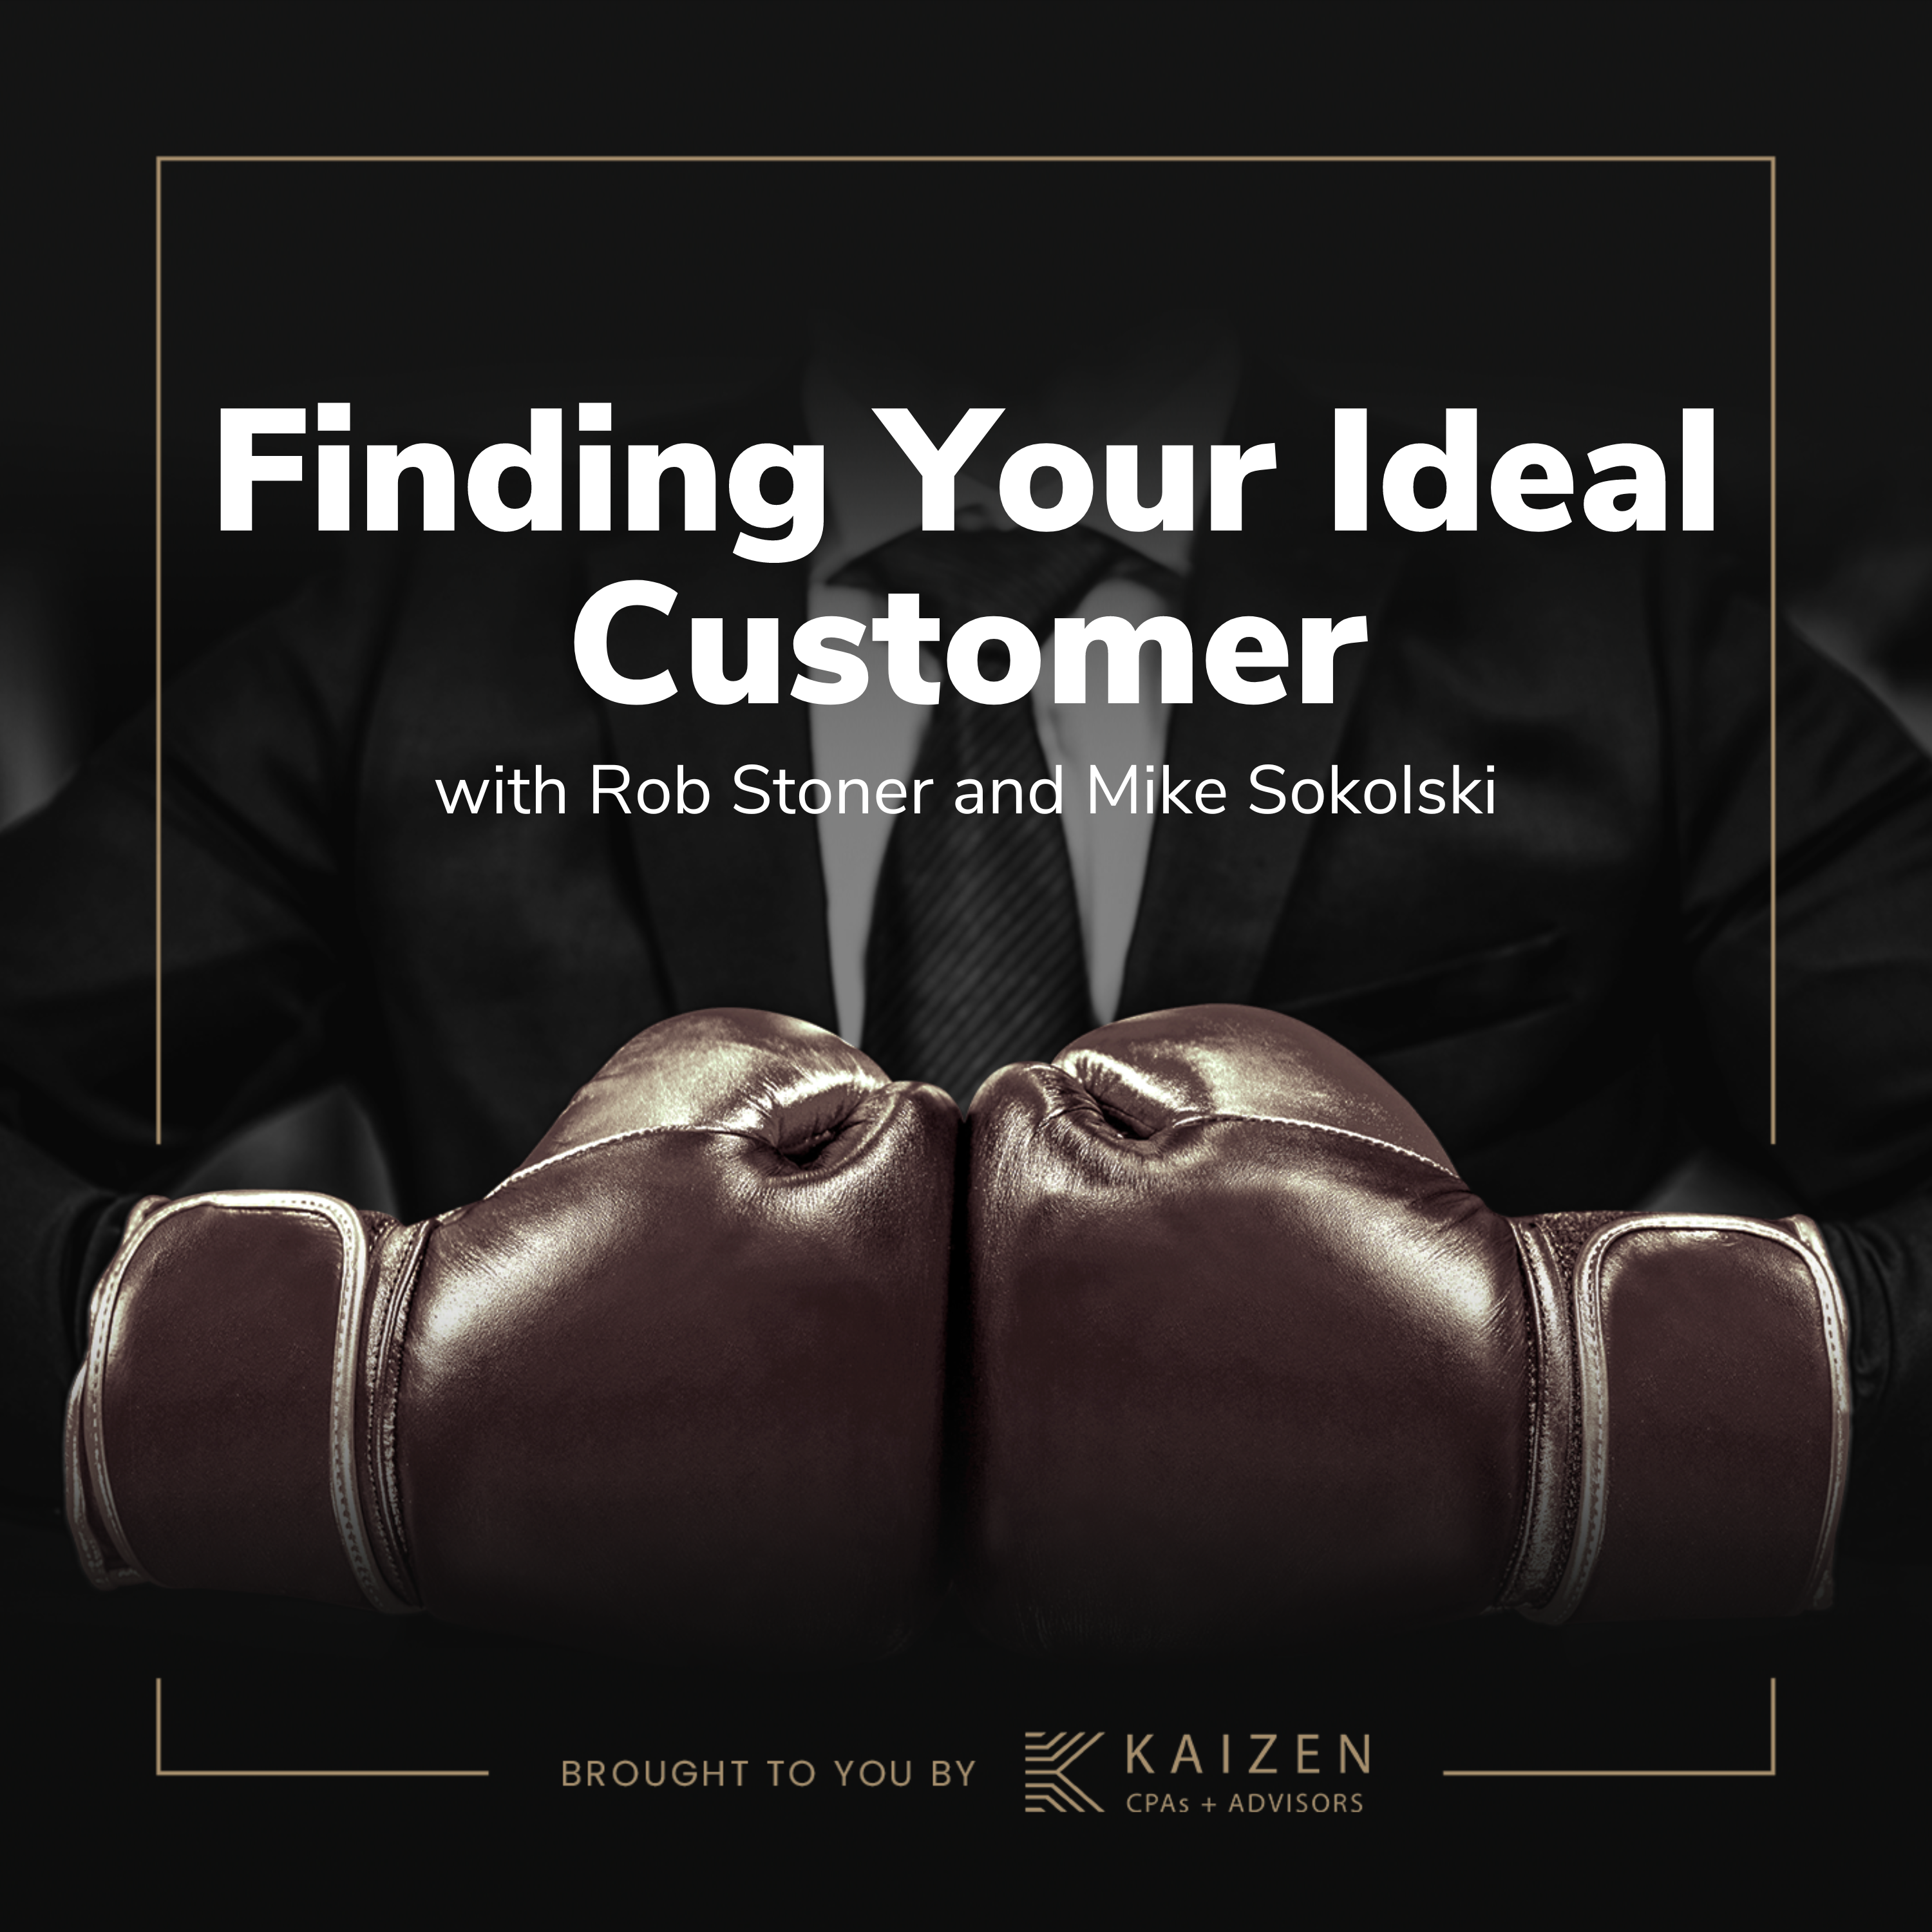 Finding Your Ideal Customer With Rob Stoner and Mike Sokolski